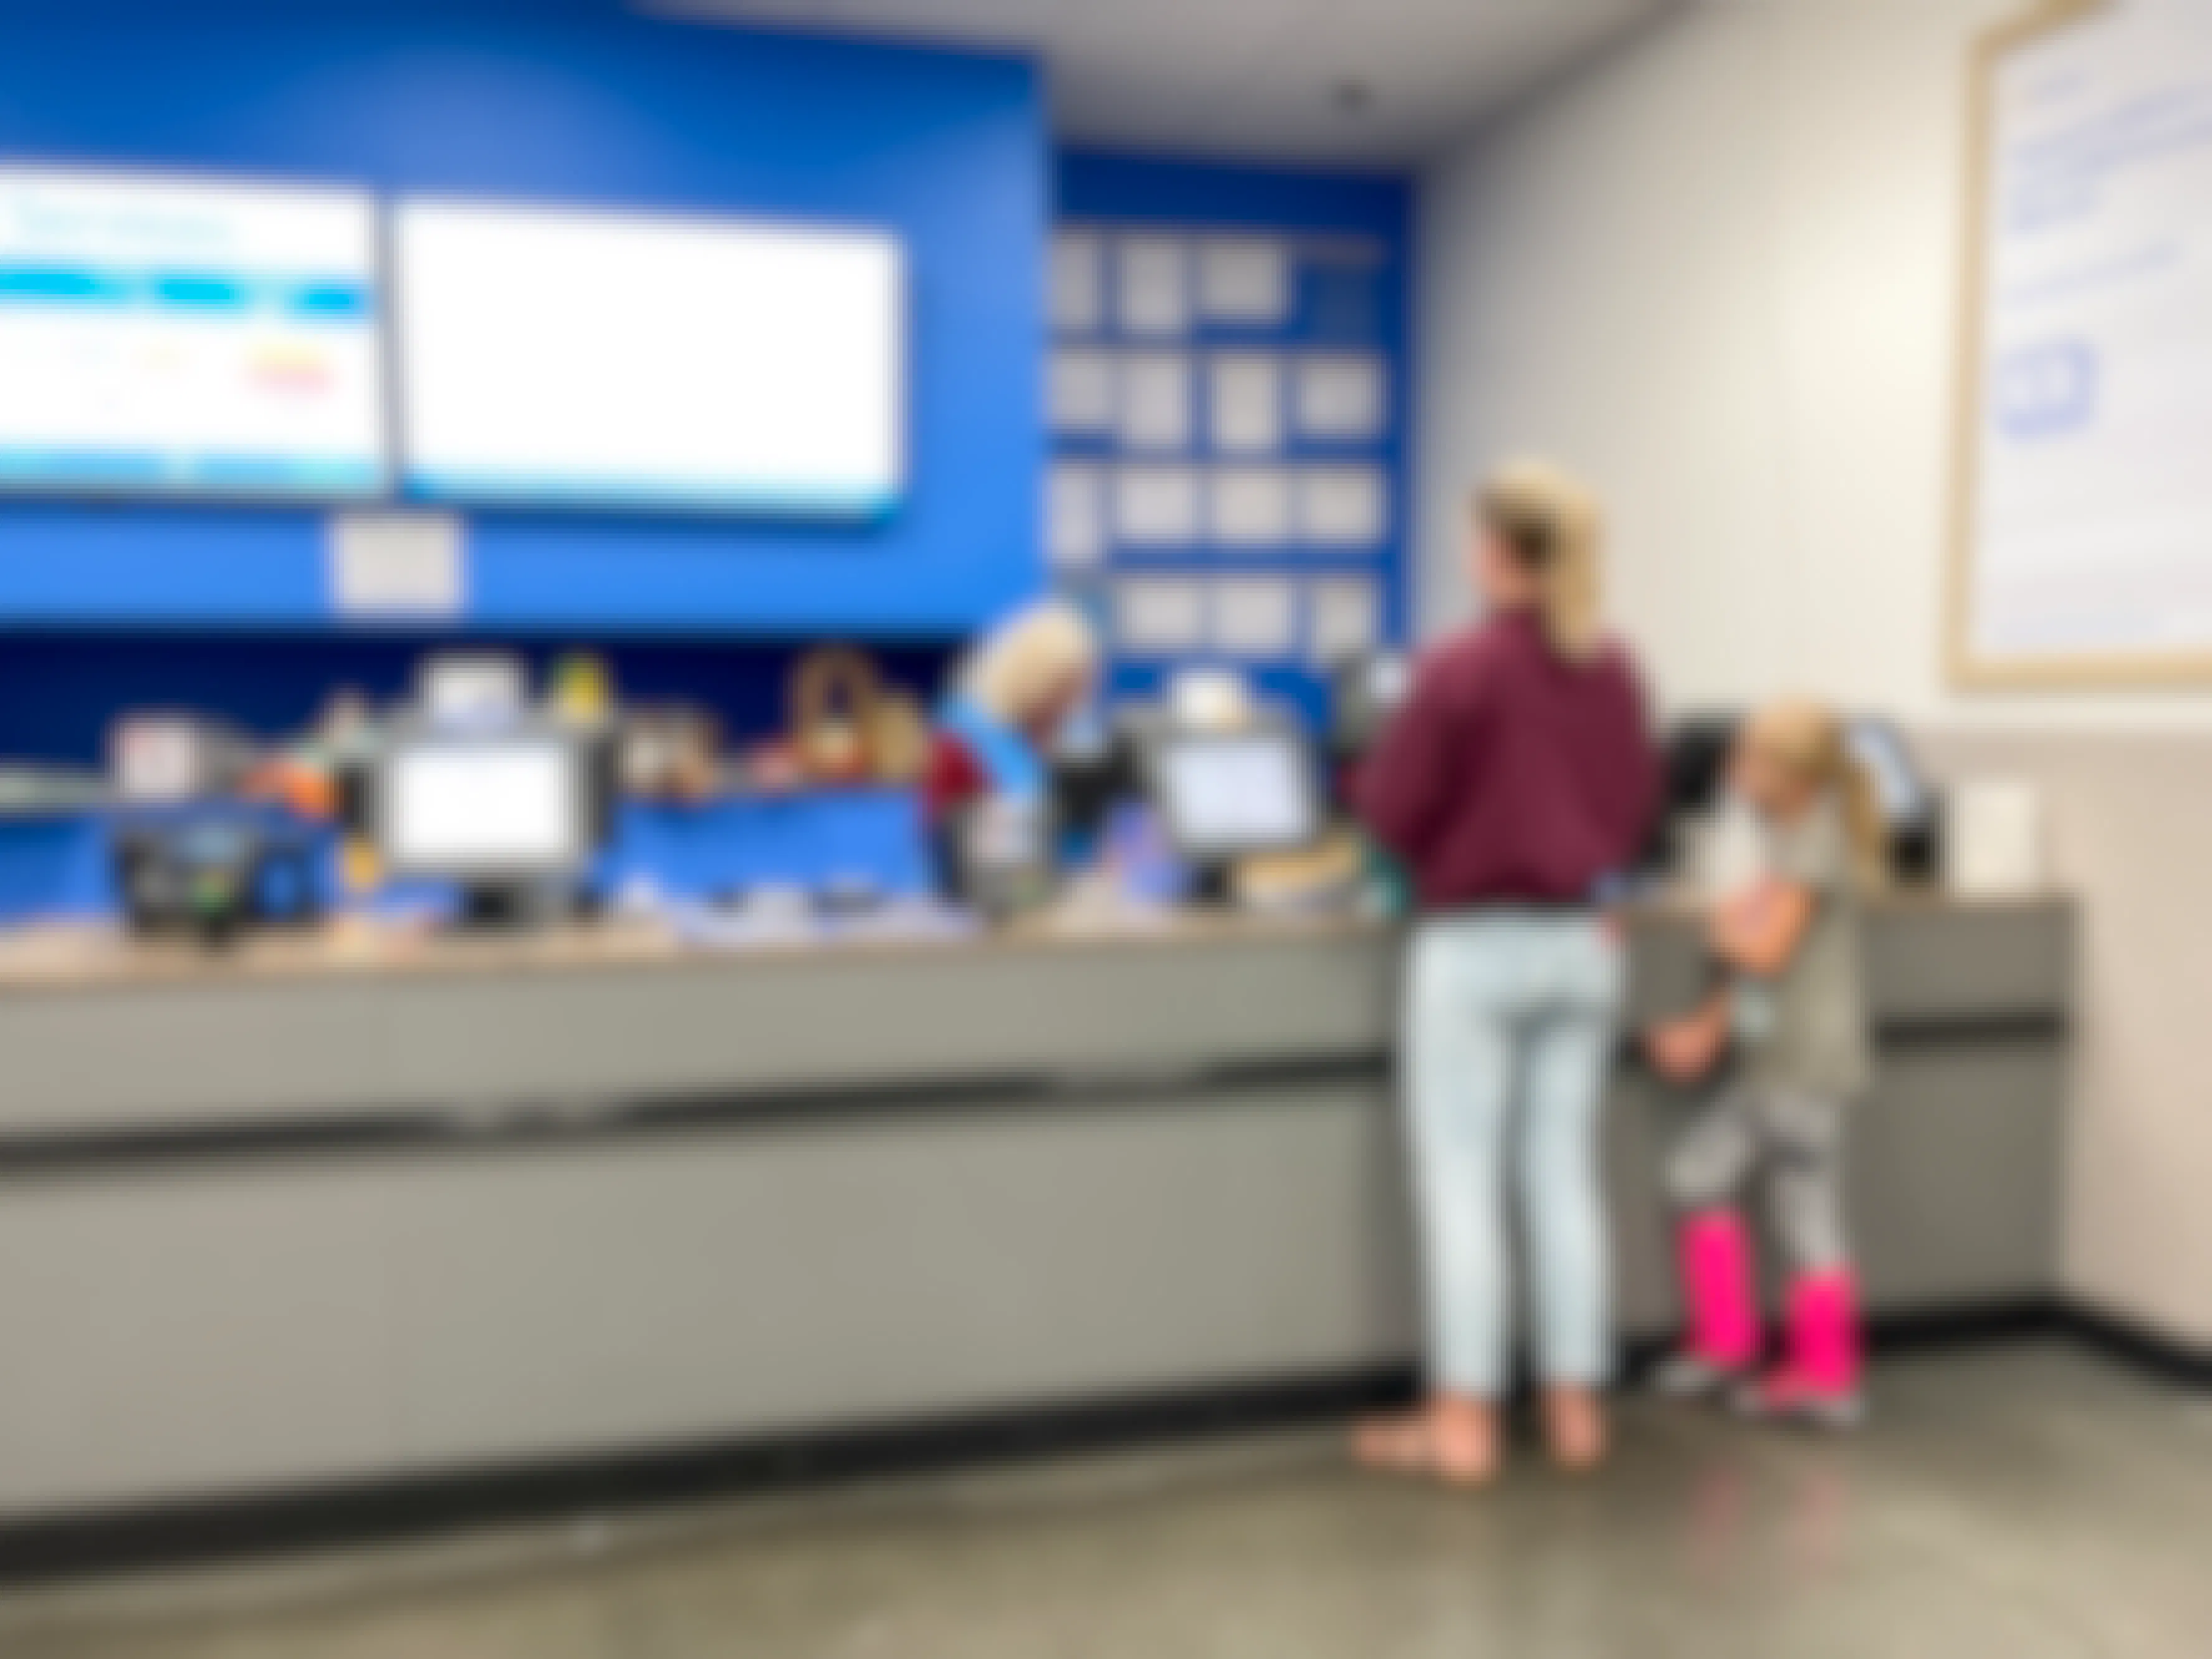 A parent and child standing together at the Walmart customer service desk